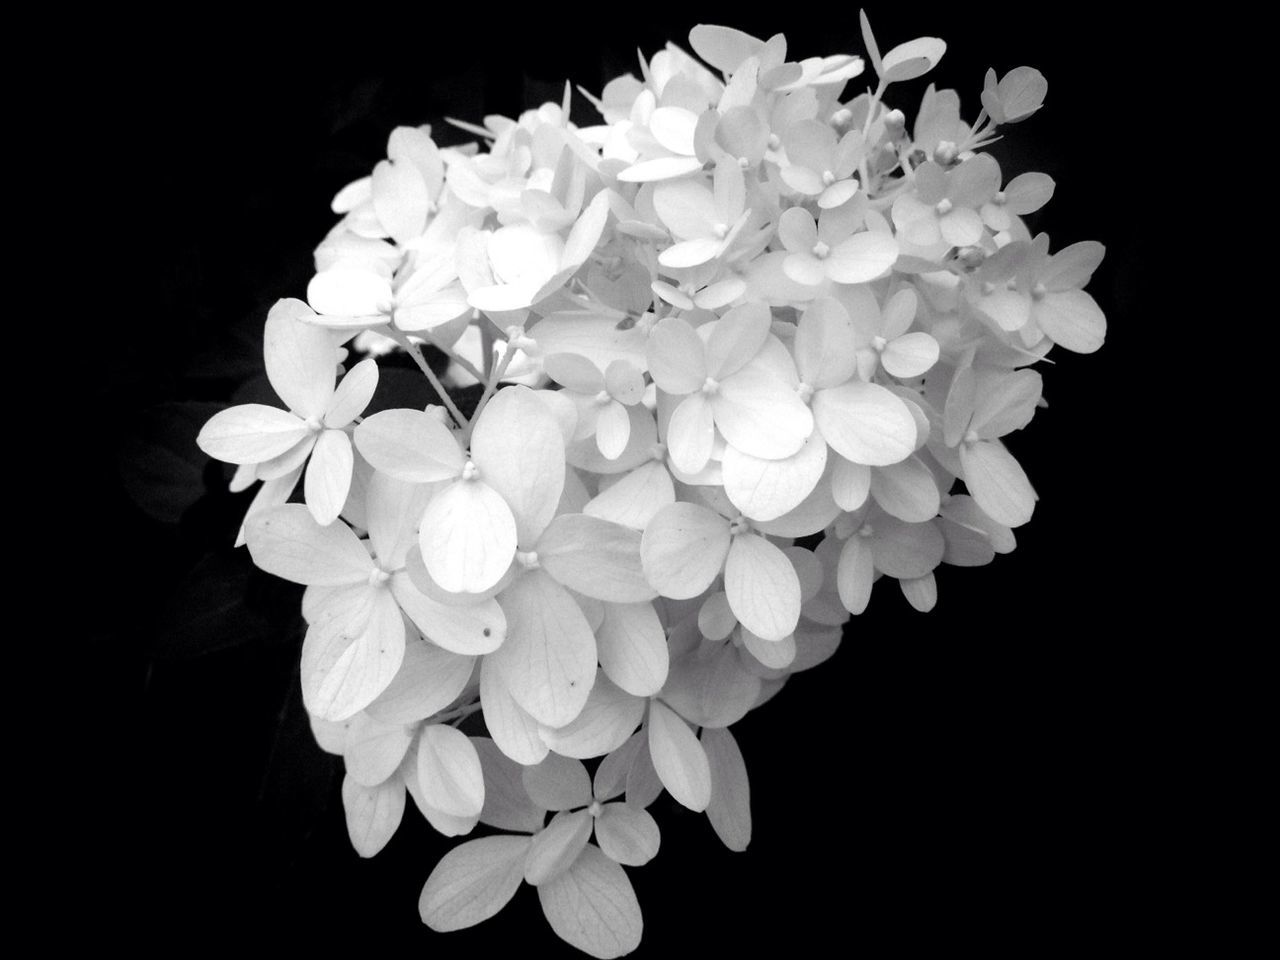 flower, black background, freshness, petal, studio shot, fragility, flower head, beauty in nature, close-up, growth, nature, white color, night, copy space, plant, blossom, blooming, in bloom, no people, botany